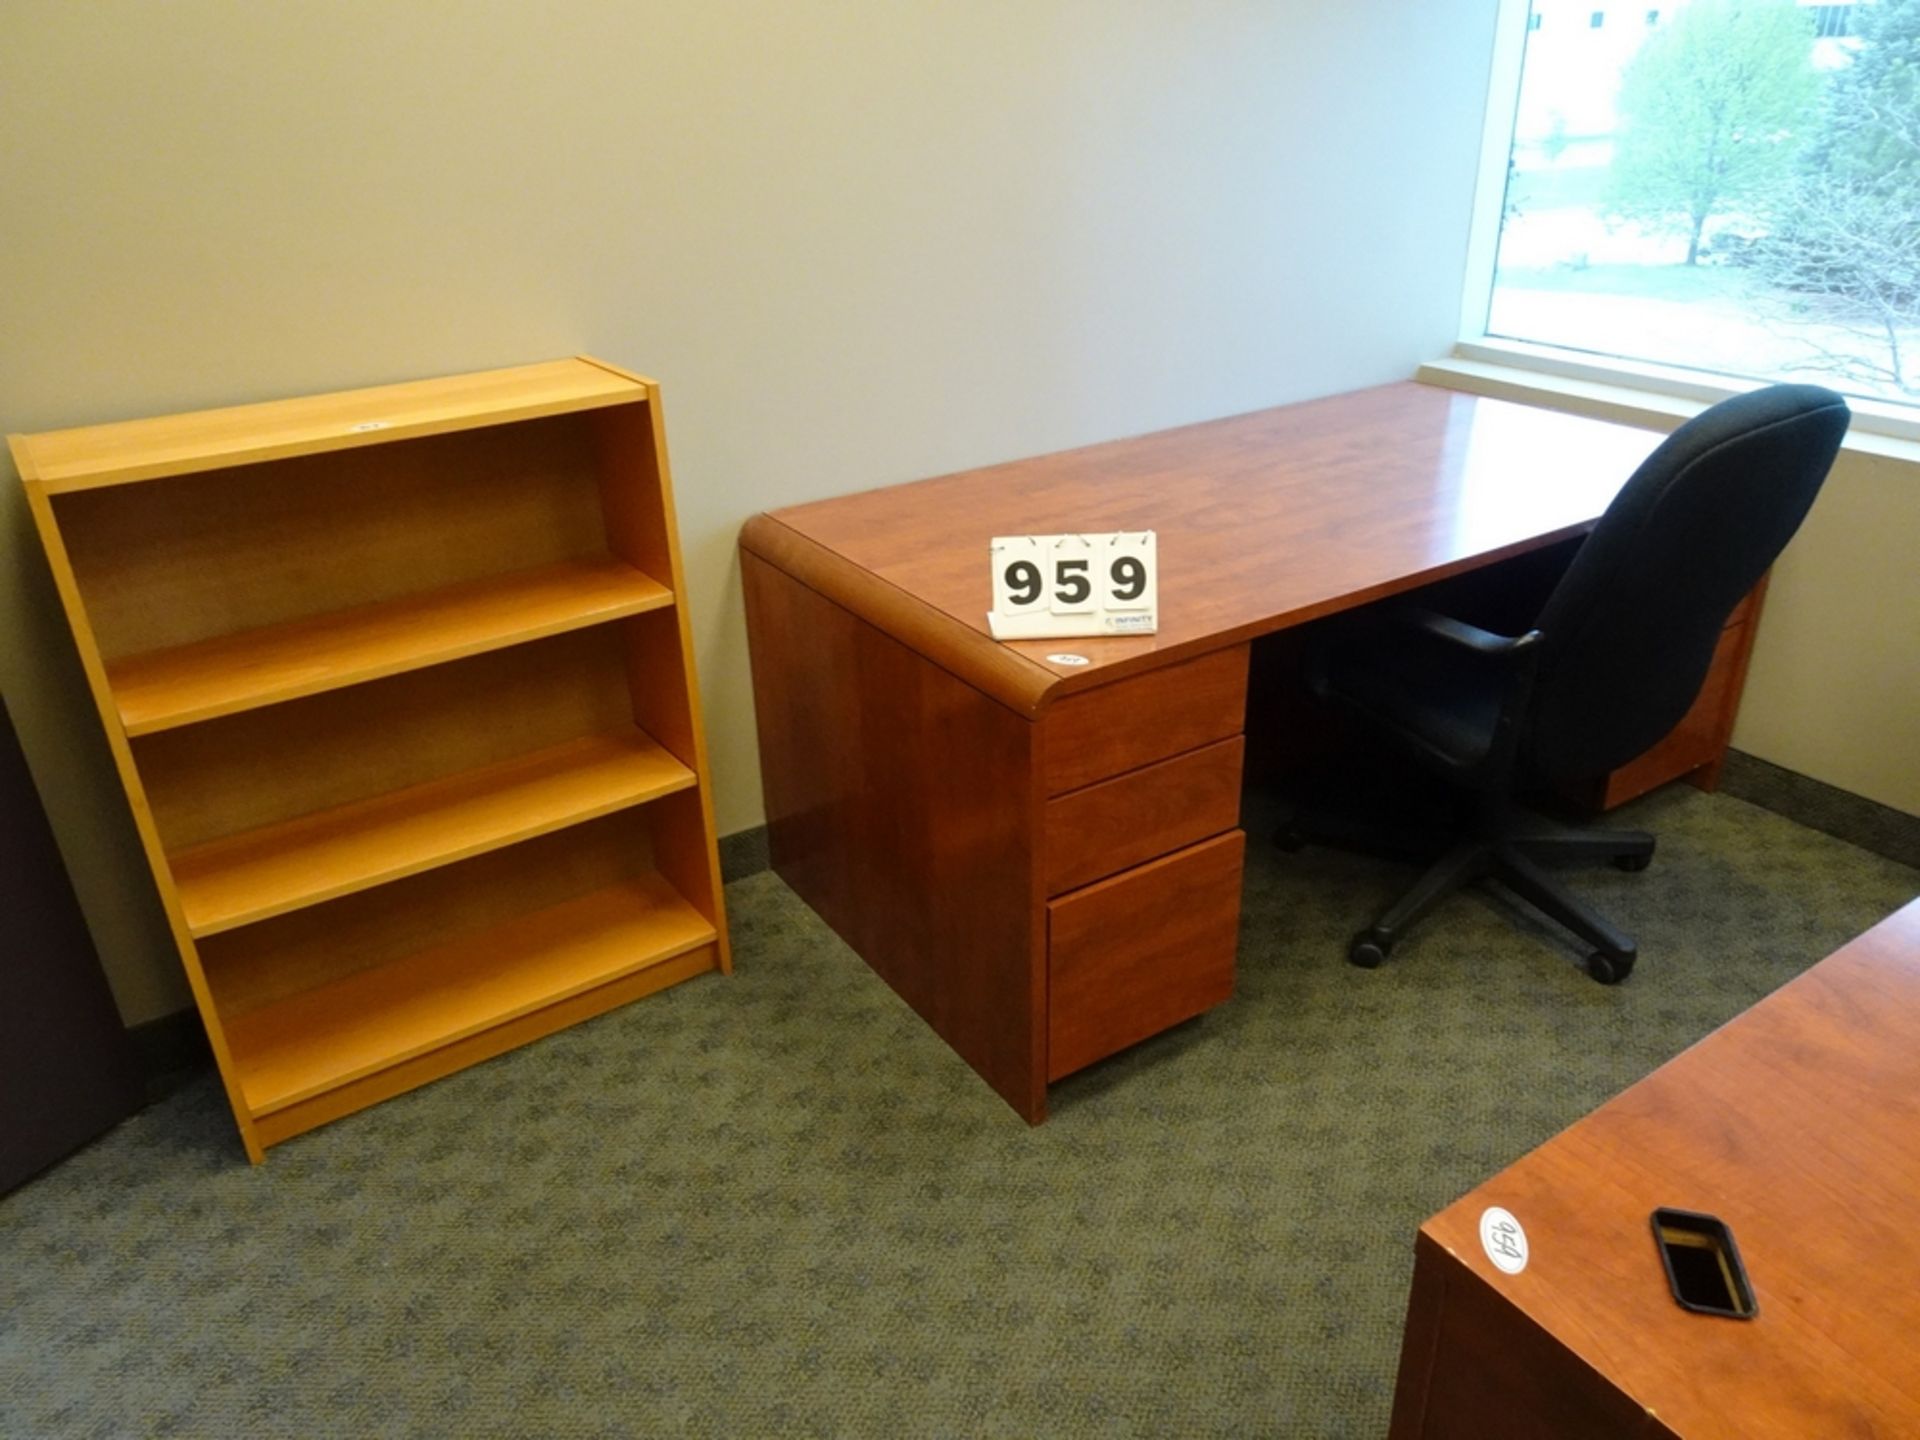 OFFICE FURNISHINGS CONSISTING OF 2 DESKS, CREDENZA, BOOKSHELF, 2 STENO CHAIRS, WALL BOARD AND CHAIR - Image 2 of 3